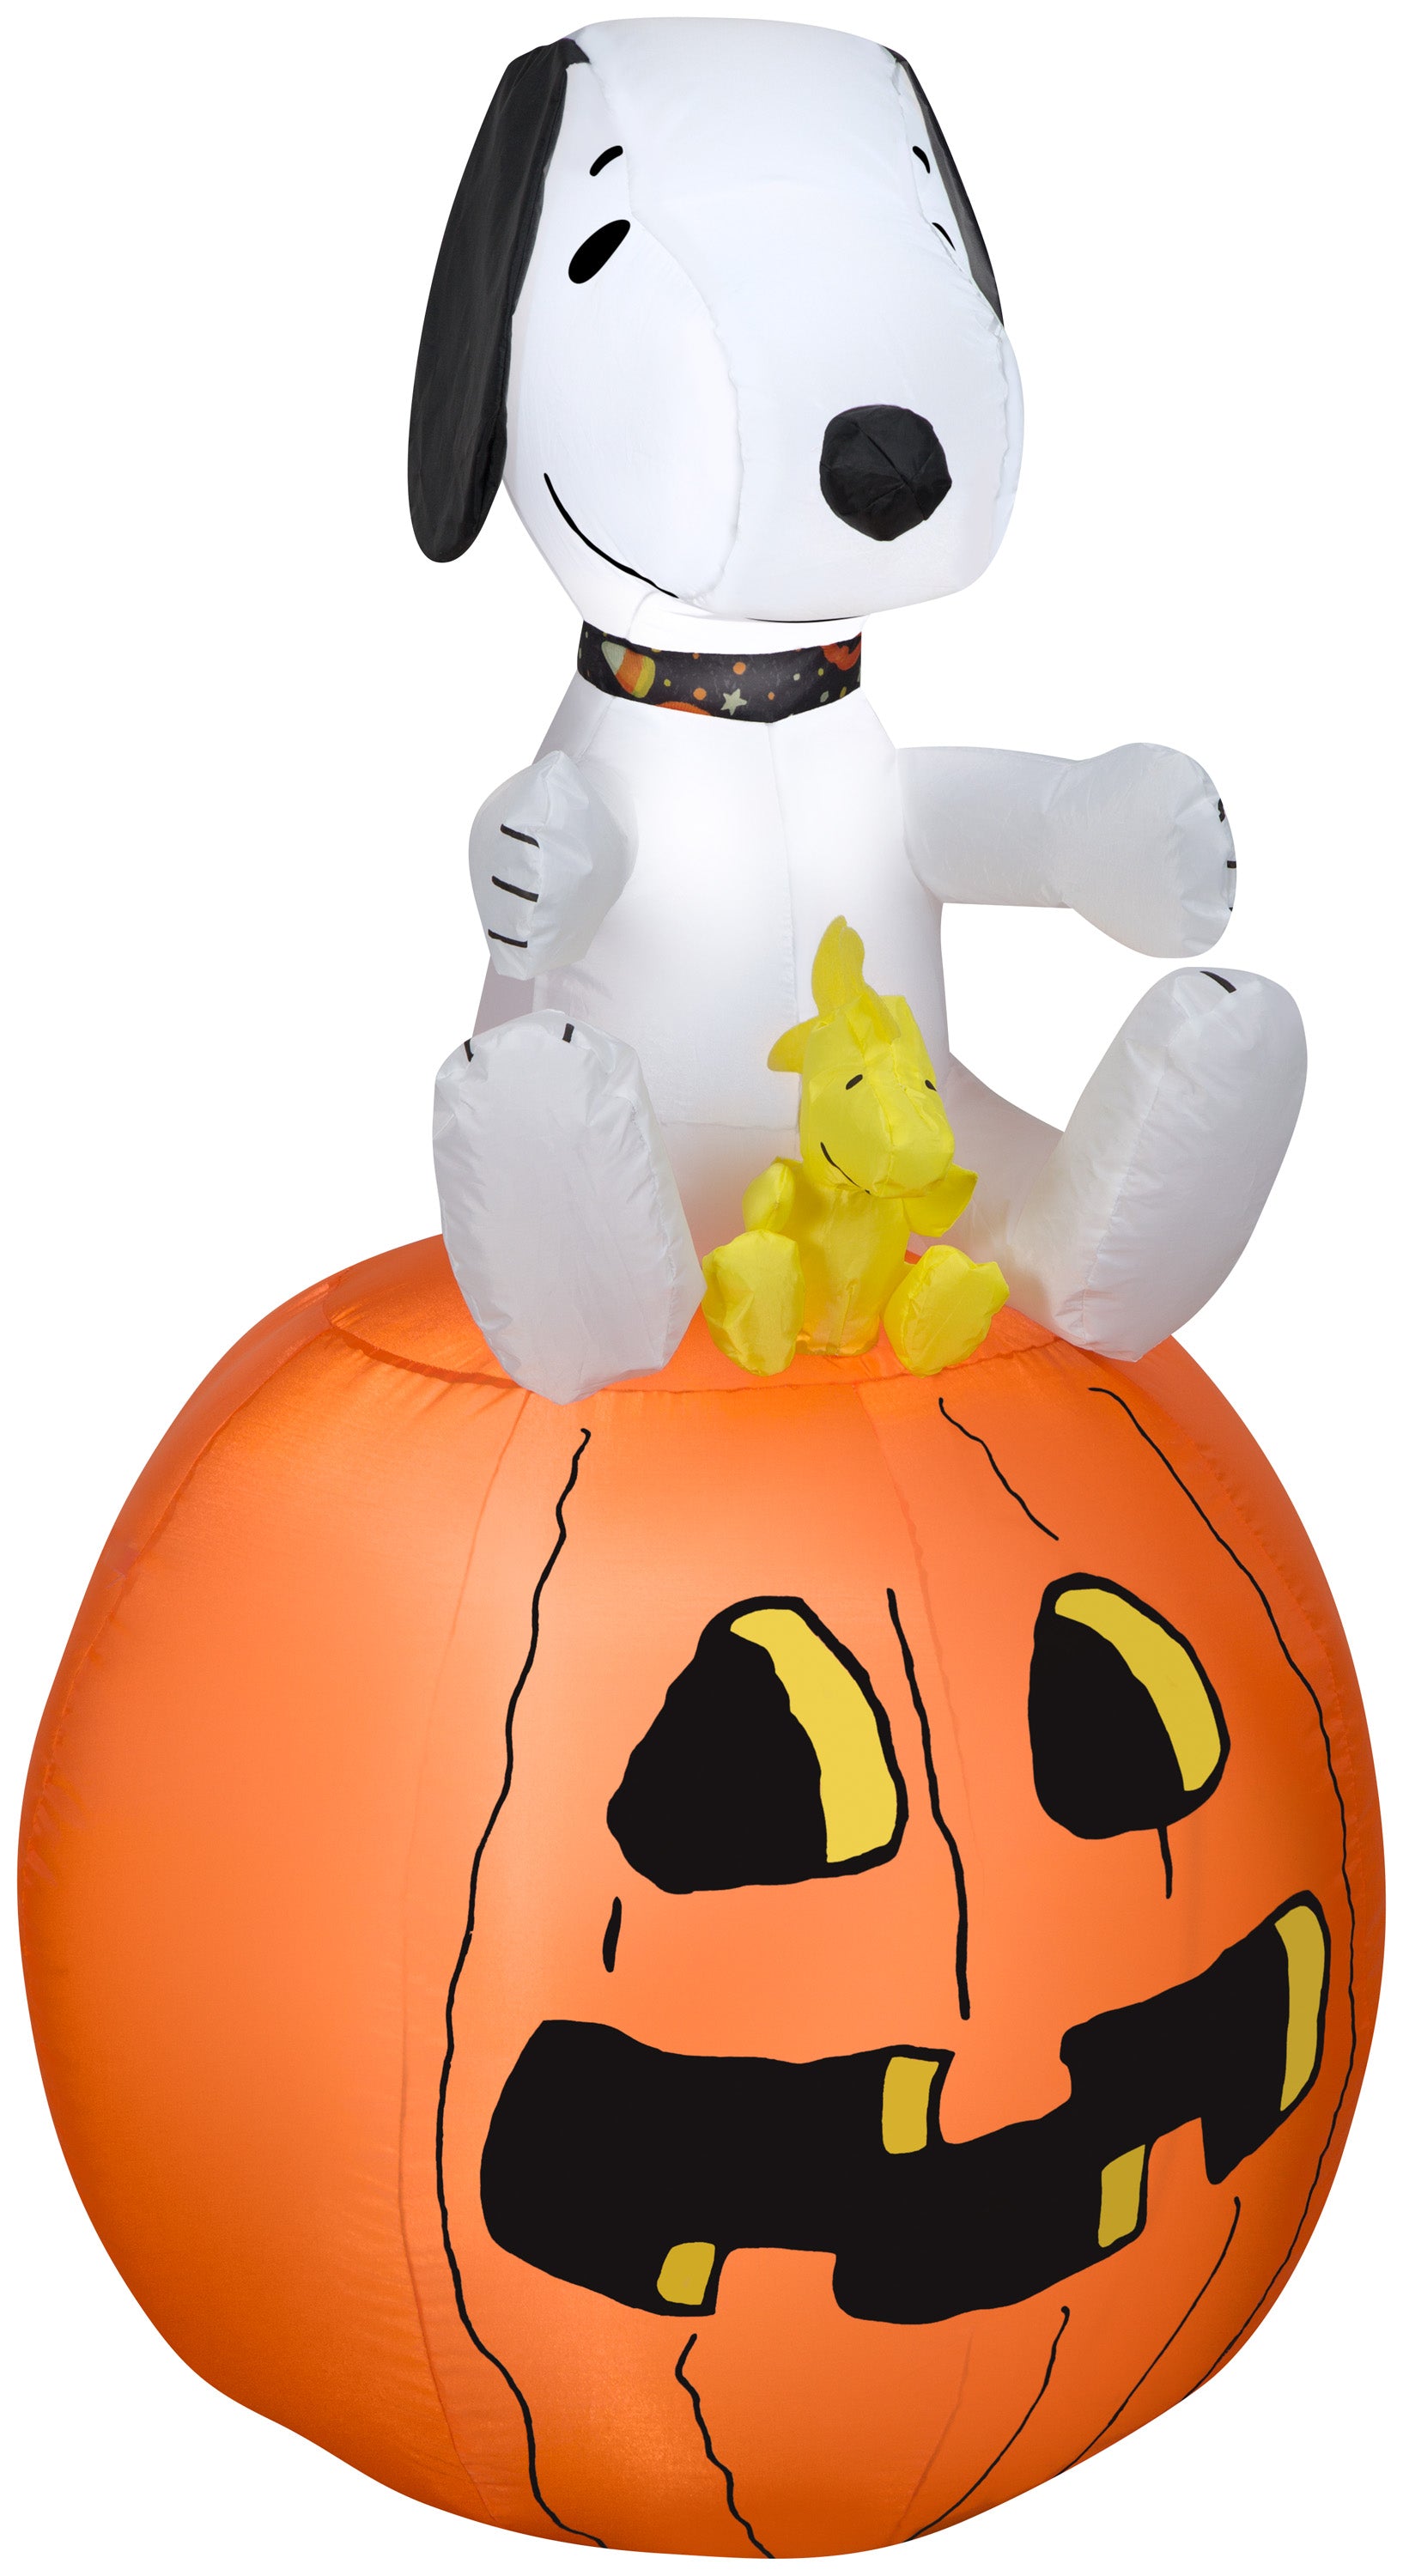 Gemmy Christmas Airblown Inflatable Snoopy w/Halloween Collar and Woodstock on Pumpkin, 3.5 ft Tall